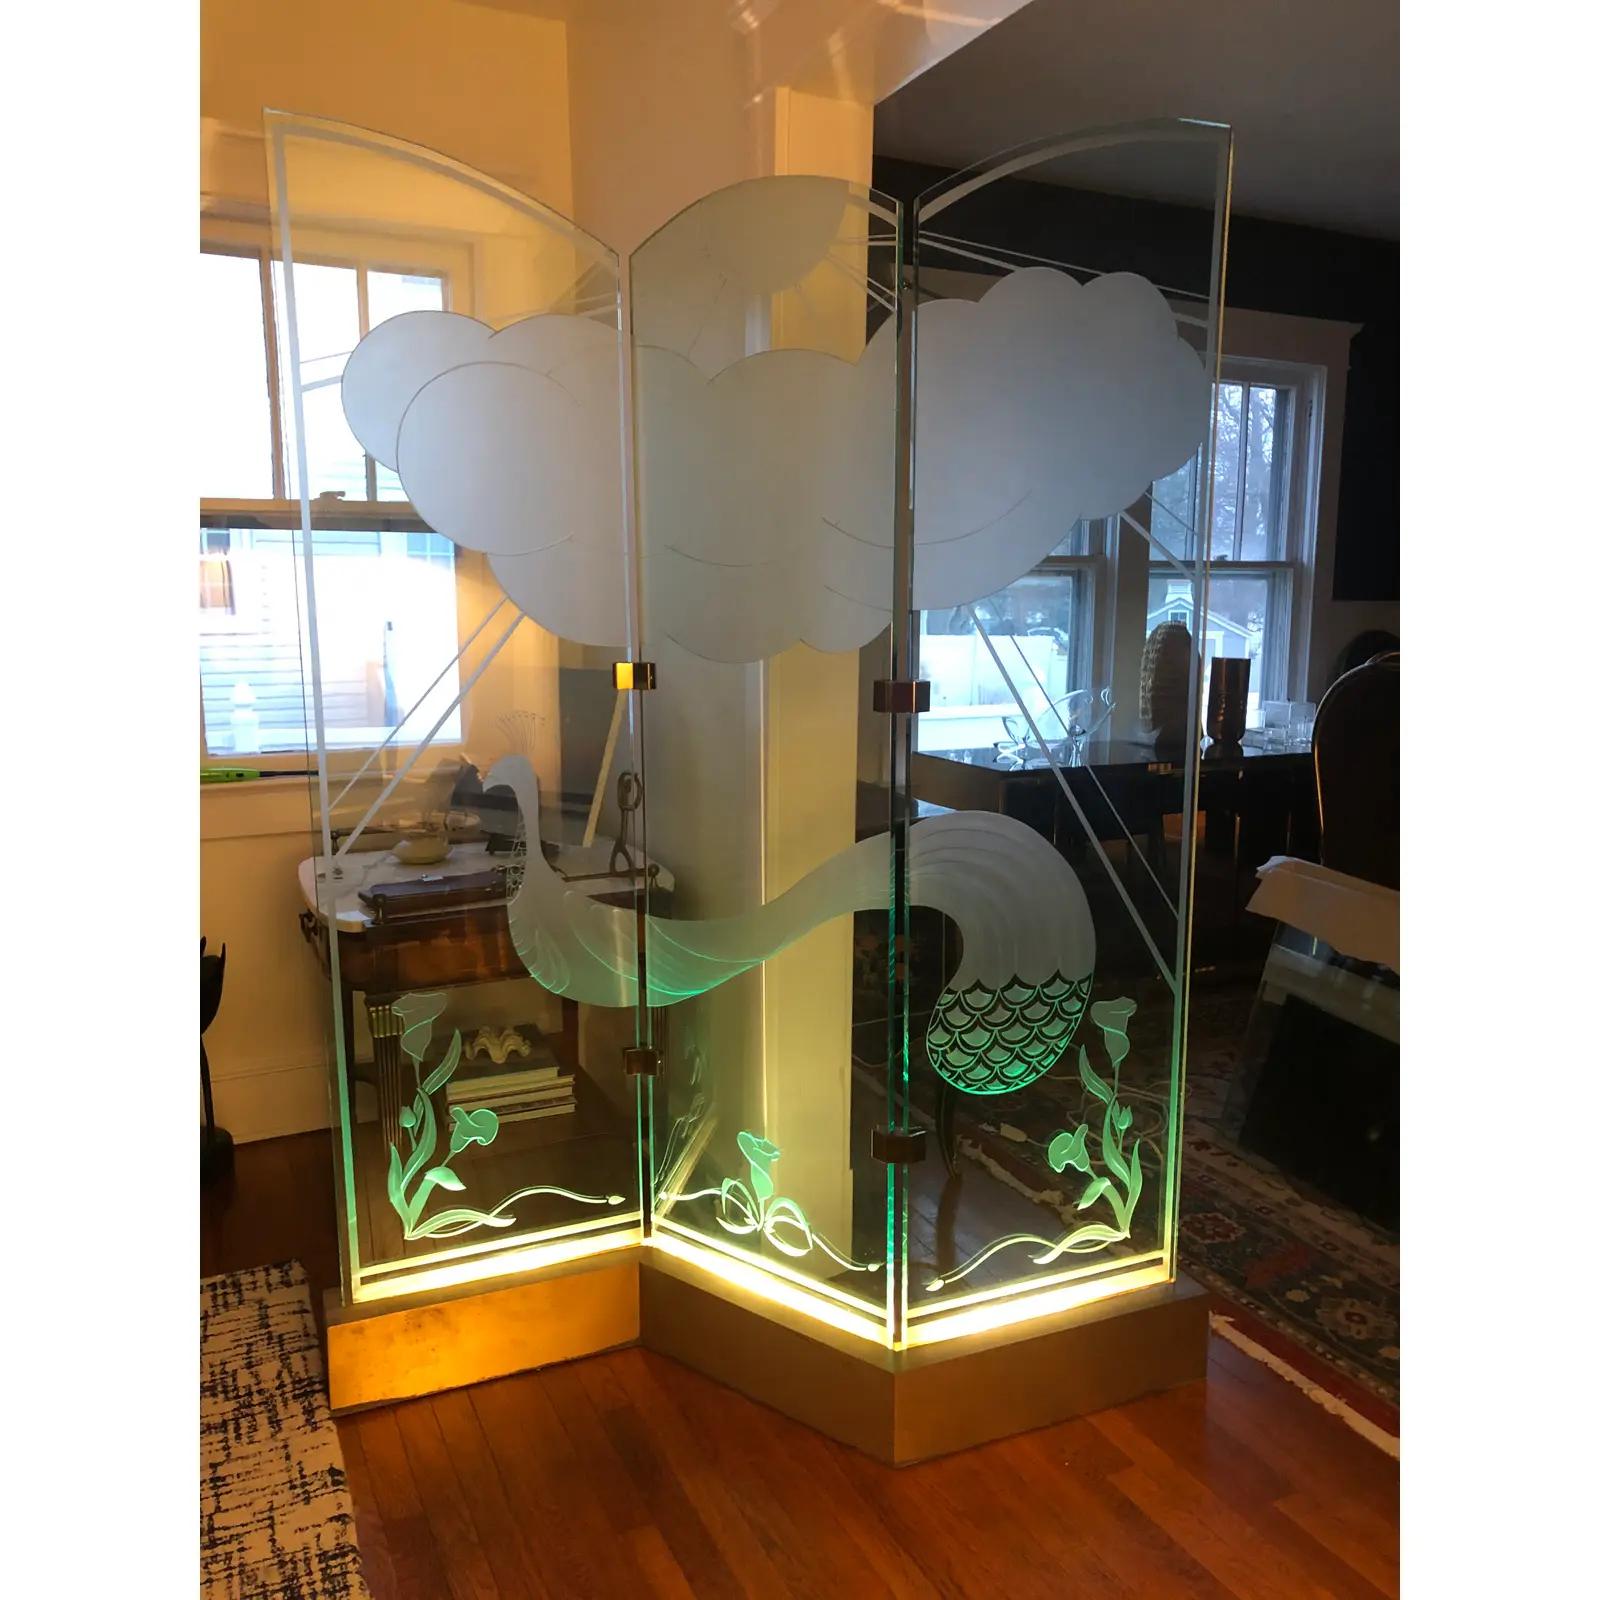 Wonderful RARE 3 panel room divider with deep etched glass. Peacock and Lillies with Sun, Rays and Clouds. All lit by channeled metal(brushed bronze) base with recessed lighting. Great visuals with asymmetrical arched top, 3/4” glass that lights to